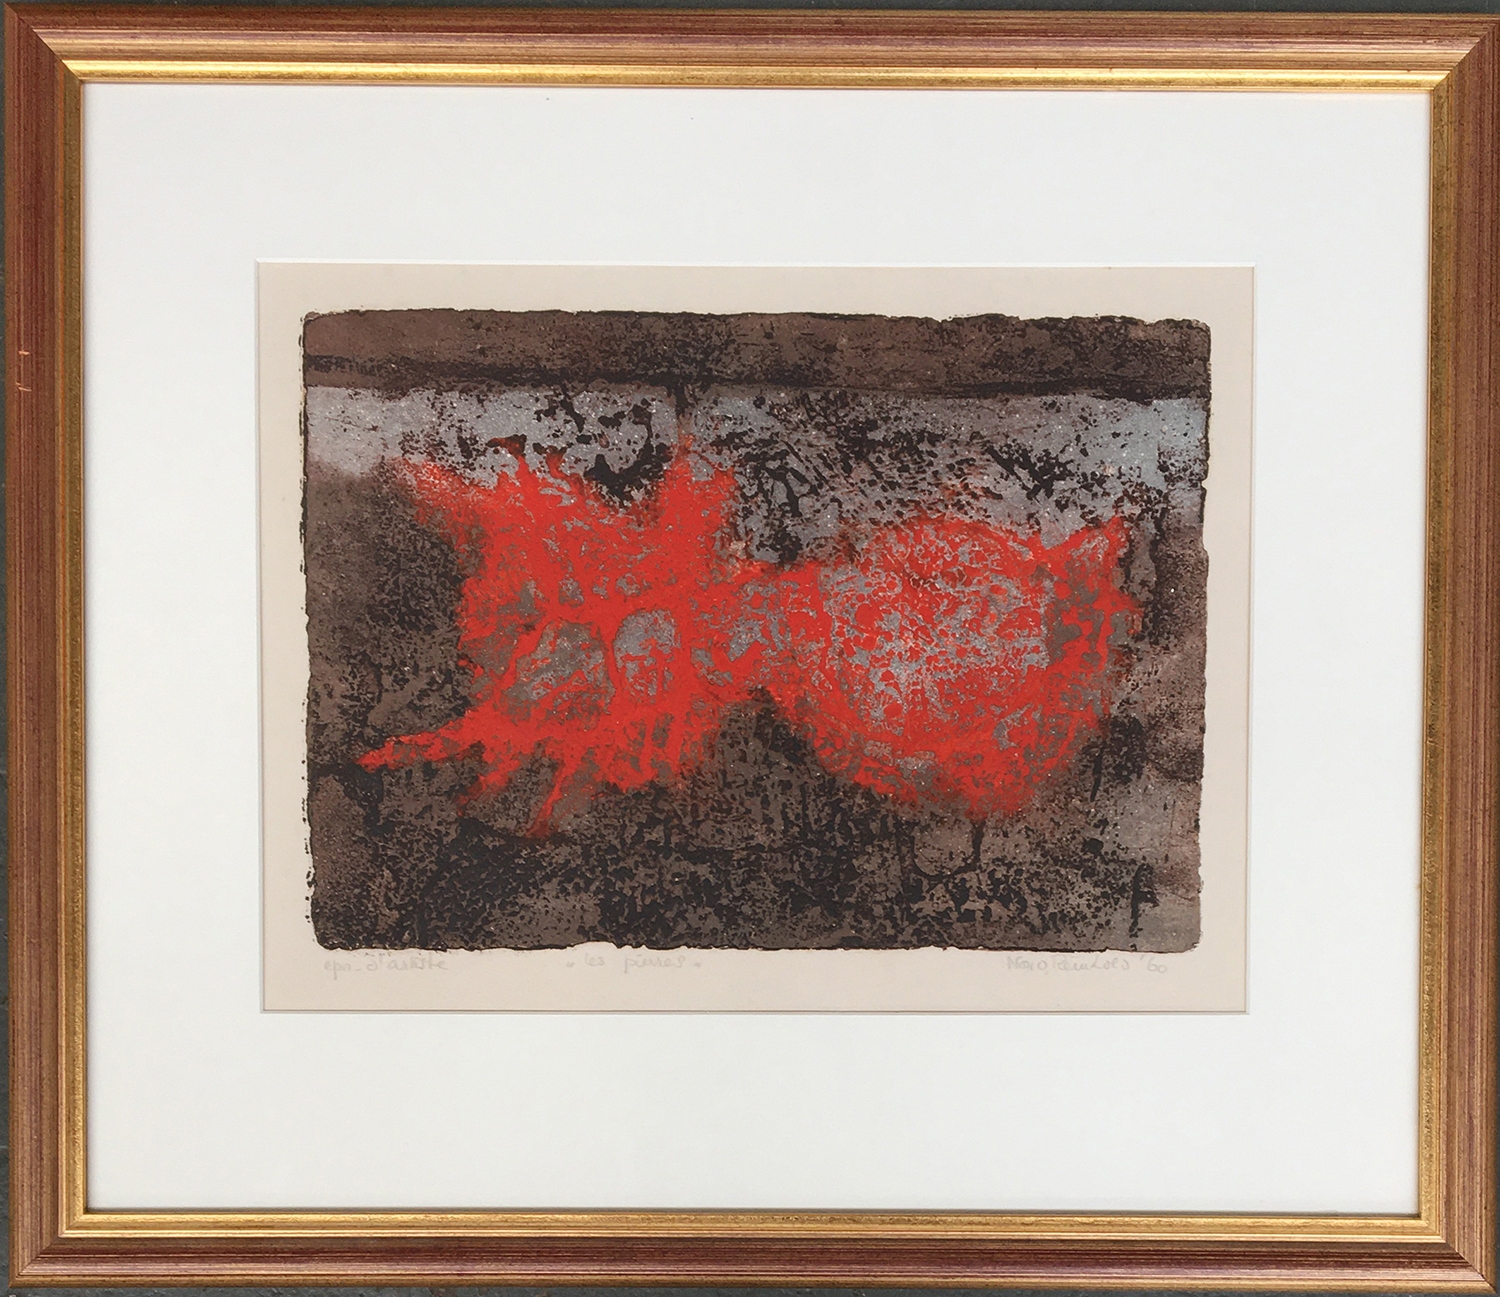 Nono Reinhold (1929-1990) "les pierres", signed, titled and dated 1960 in pencil and inscribed - Image 2 of 2